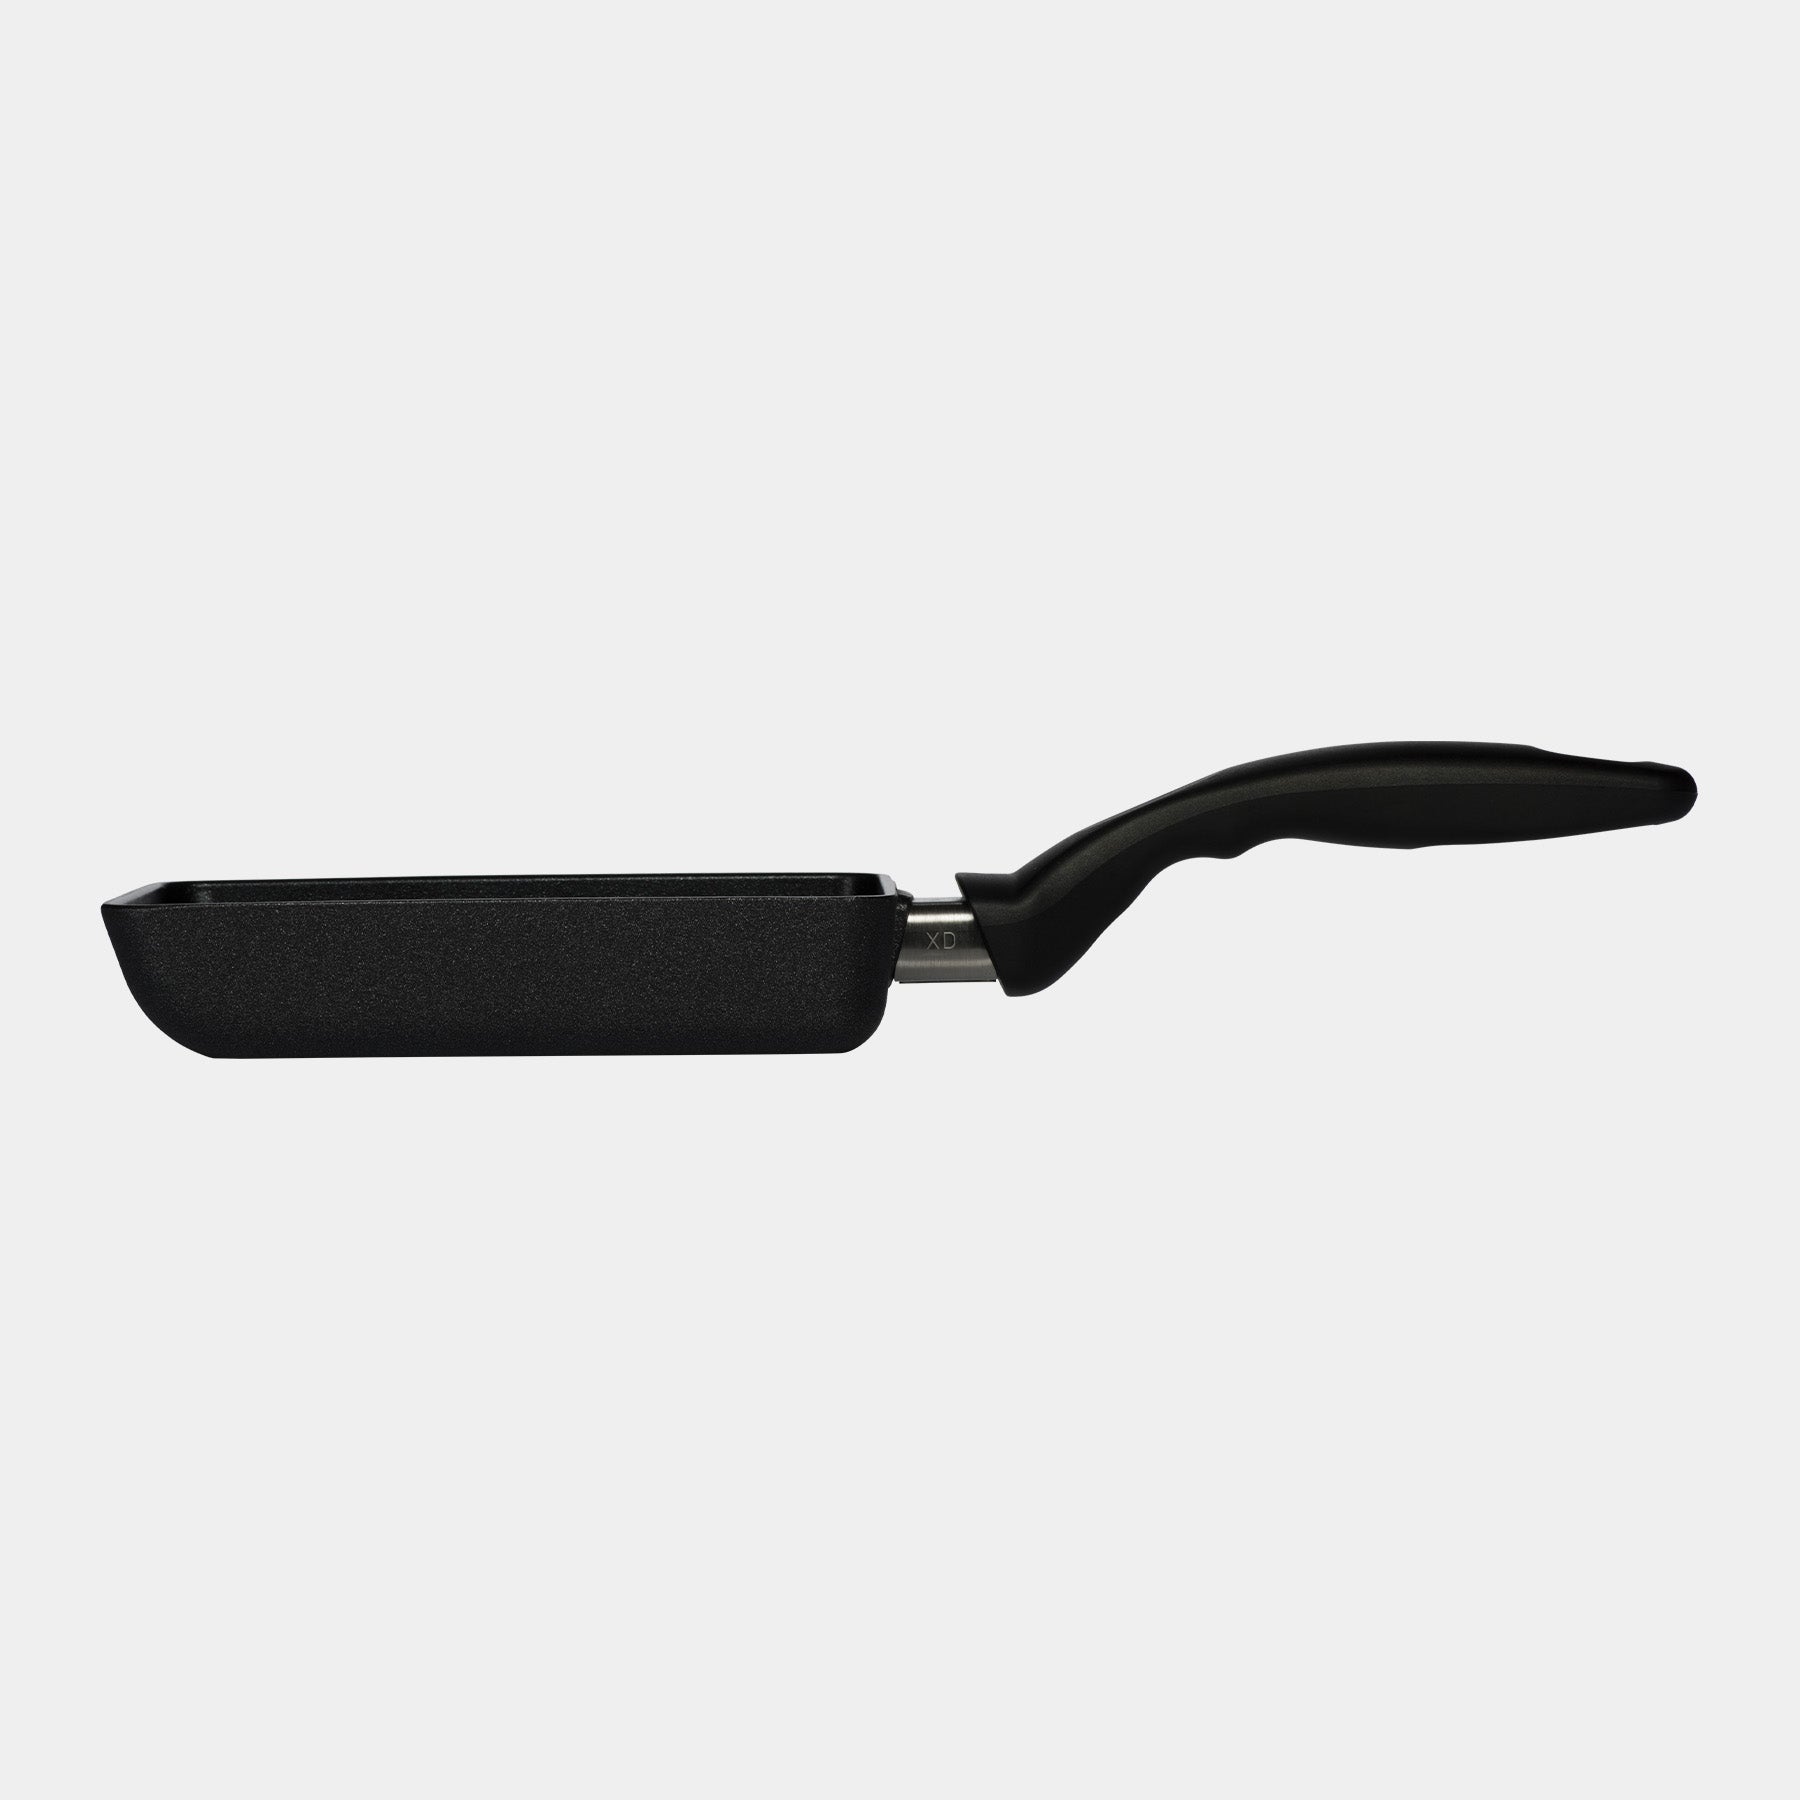 XD Nonstick 5" x 7" Japanese Omelet Pan - side view